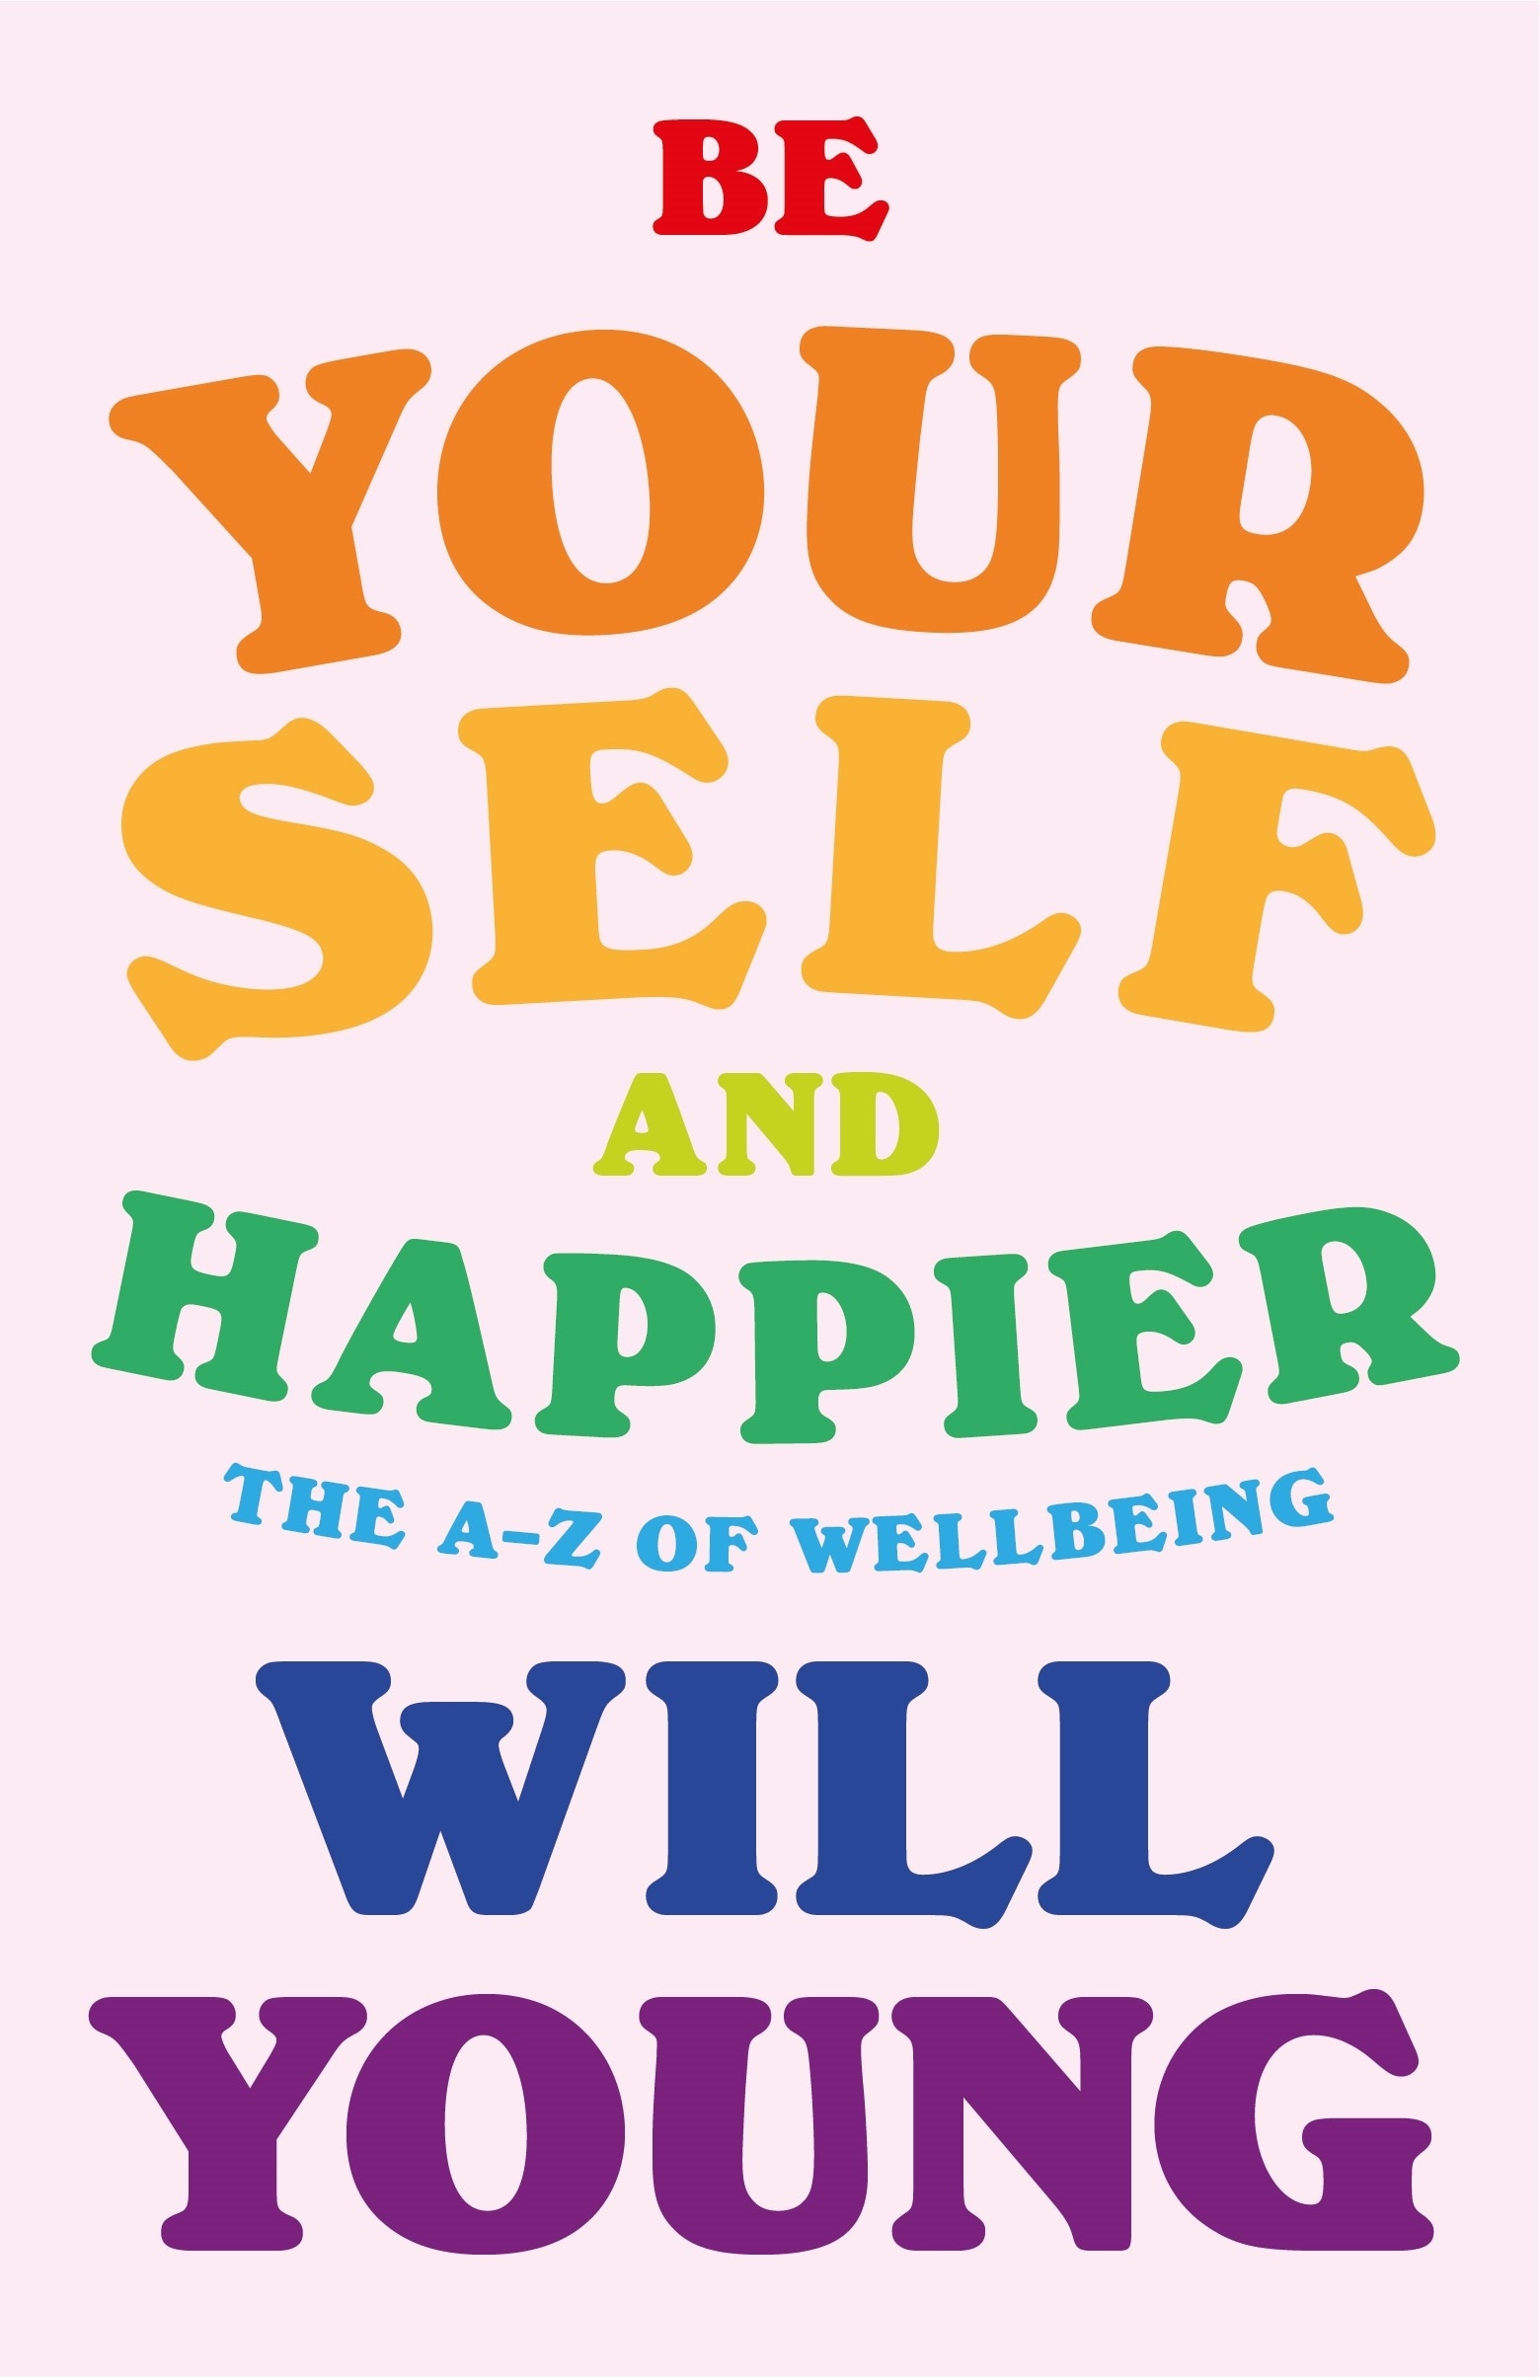 Book “Be Yourself and Happier” by Will Young — April 21, 2022